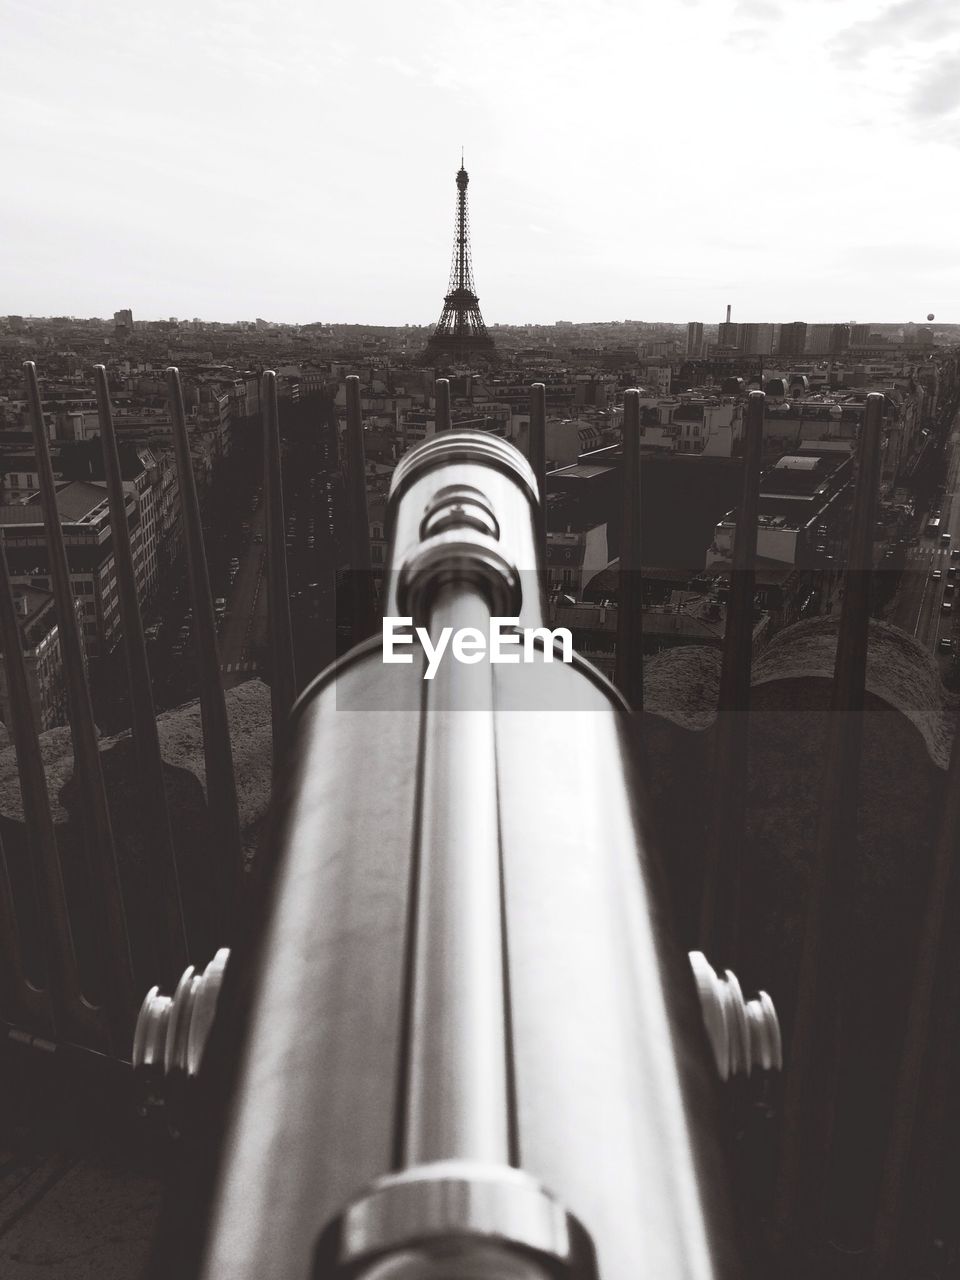 Cityscape with eiffel tower and coin operated binoculars in foreground